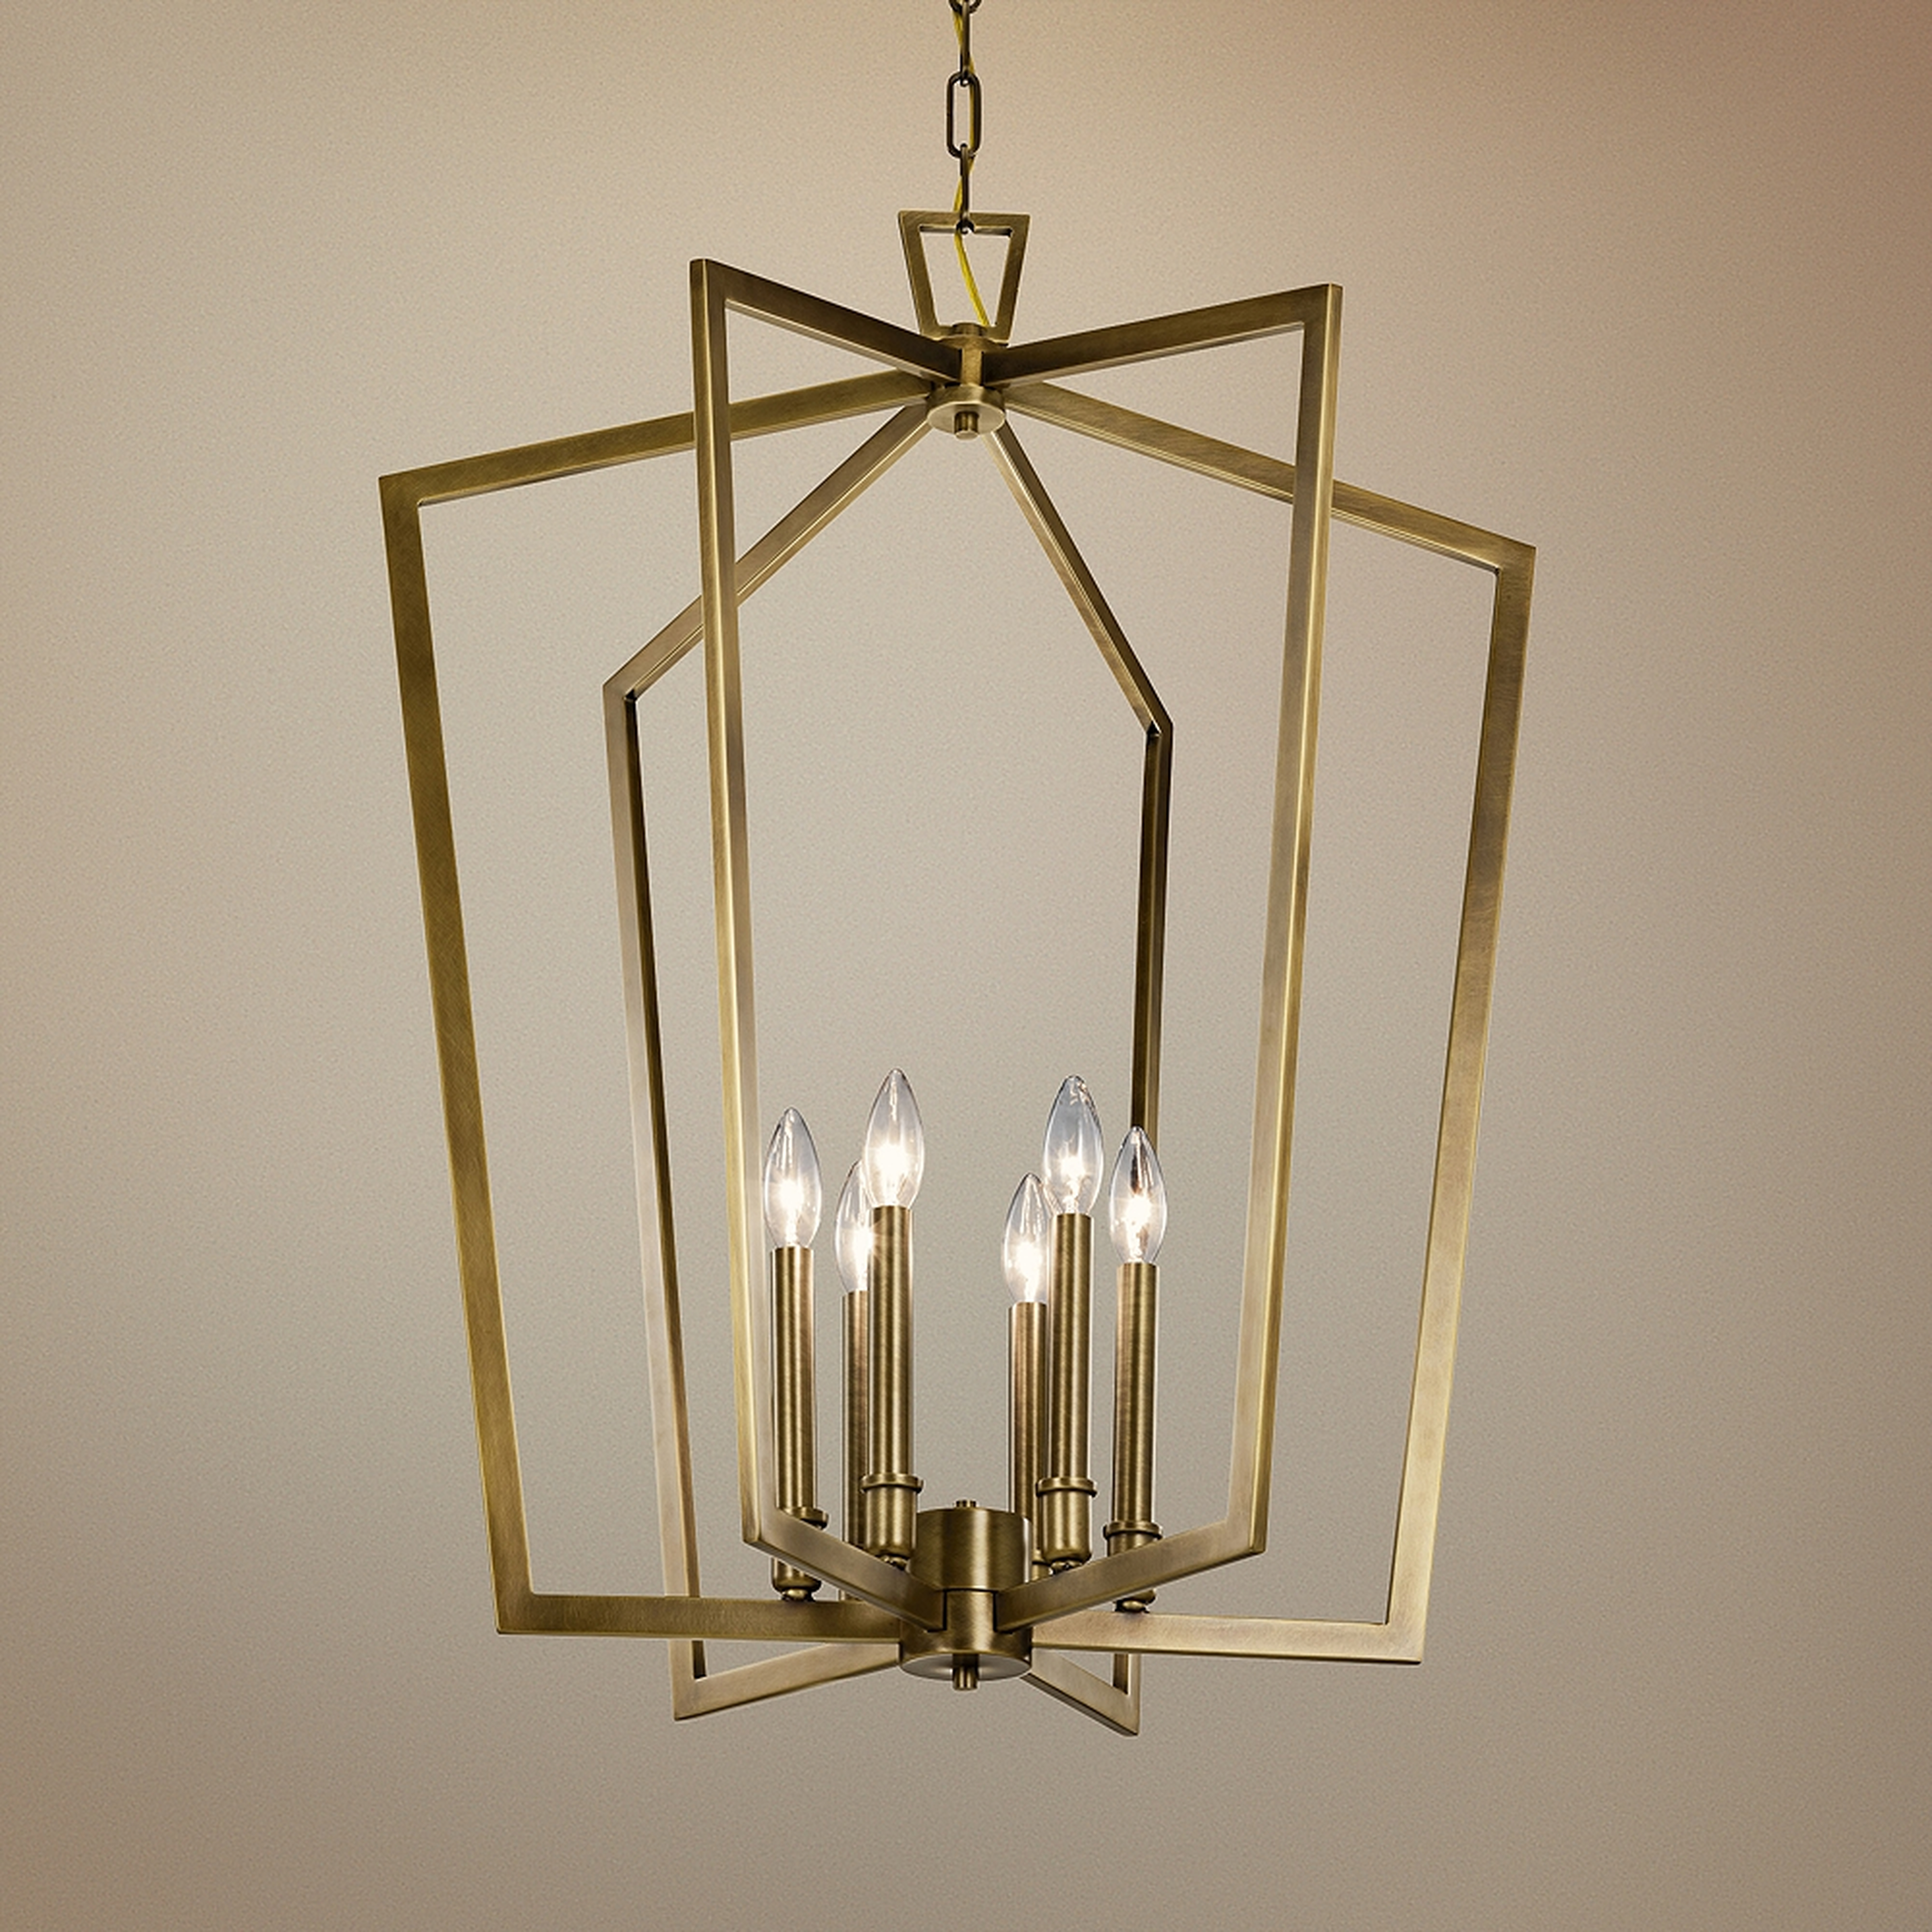 Abbotswell 24 3/4" Wide Natural Brass 6-Light Foyer Pendant - Style # 75D12 - Lamps Plus